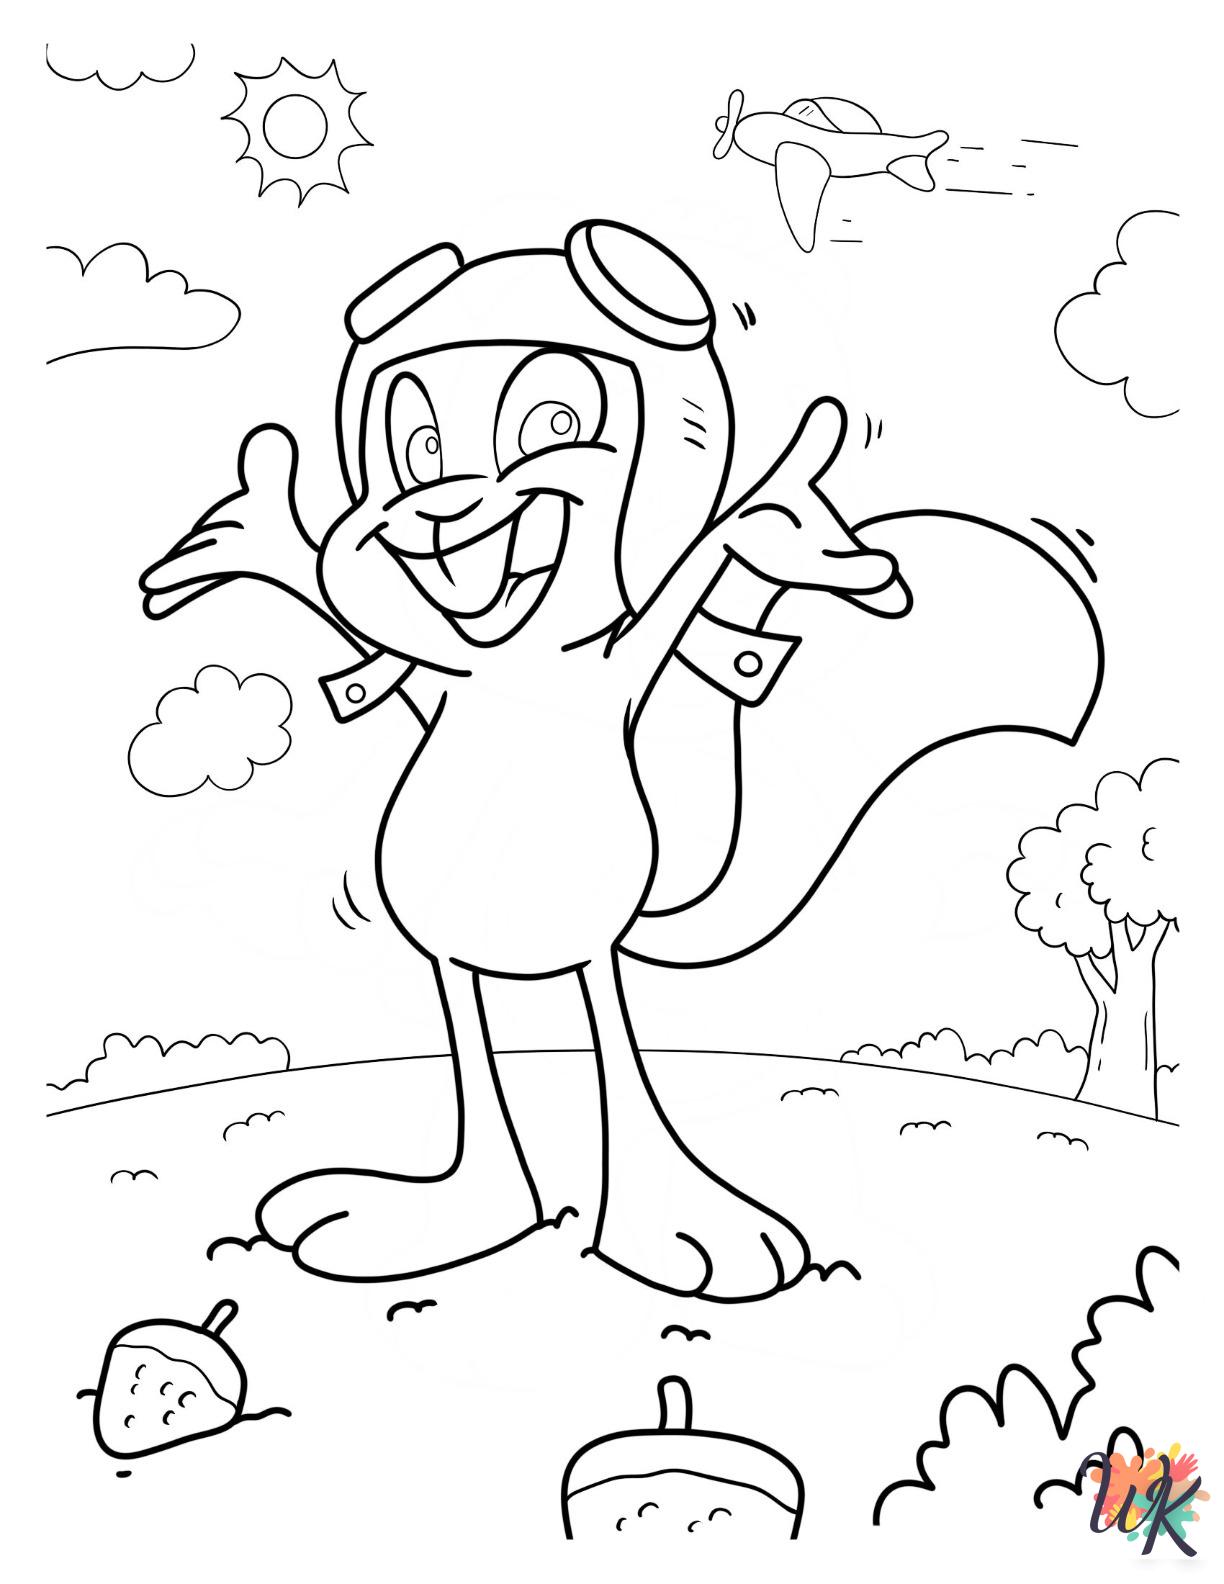 Squirrel ornament coloring pages